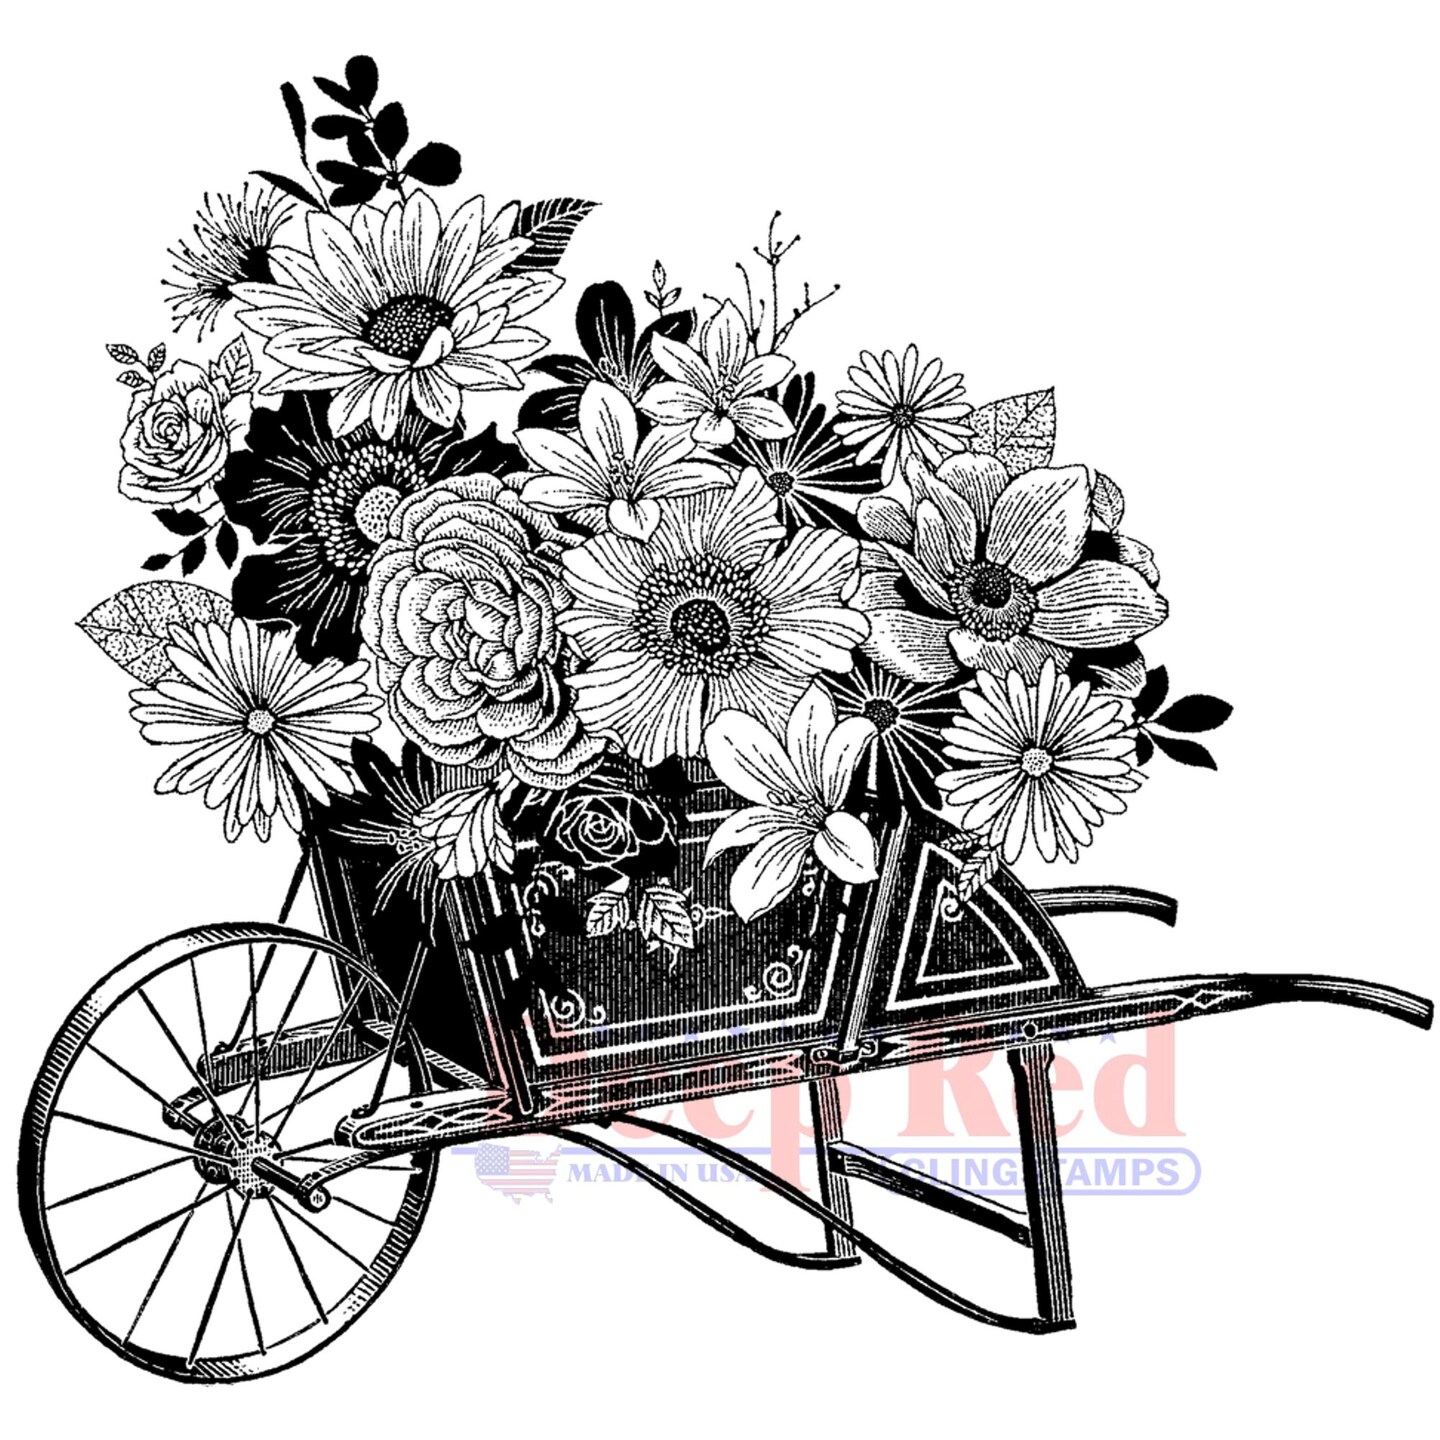 Deep Red Stamps Wheelbarrow Bouquet Rubber Cling Stamp 3.2 x 3.1 inches